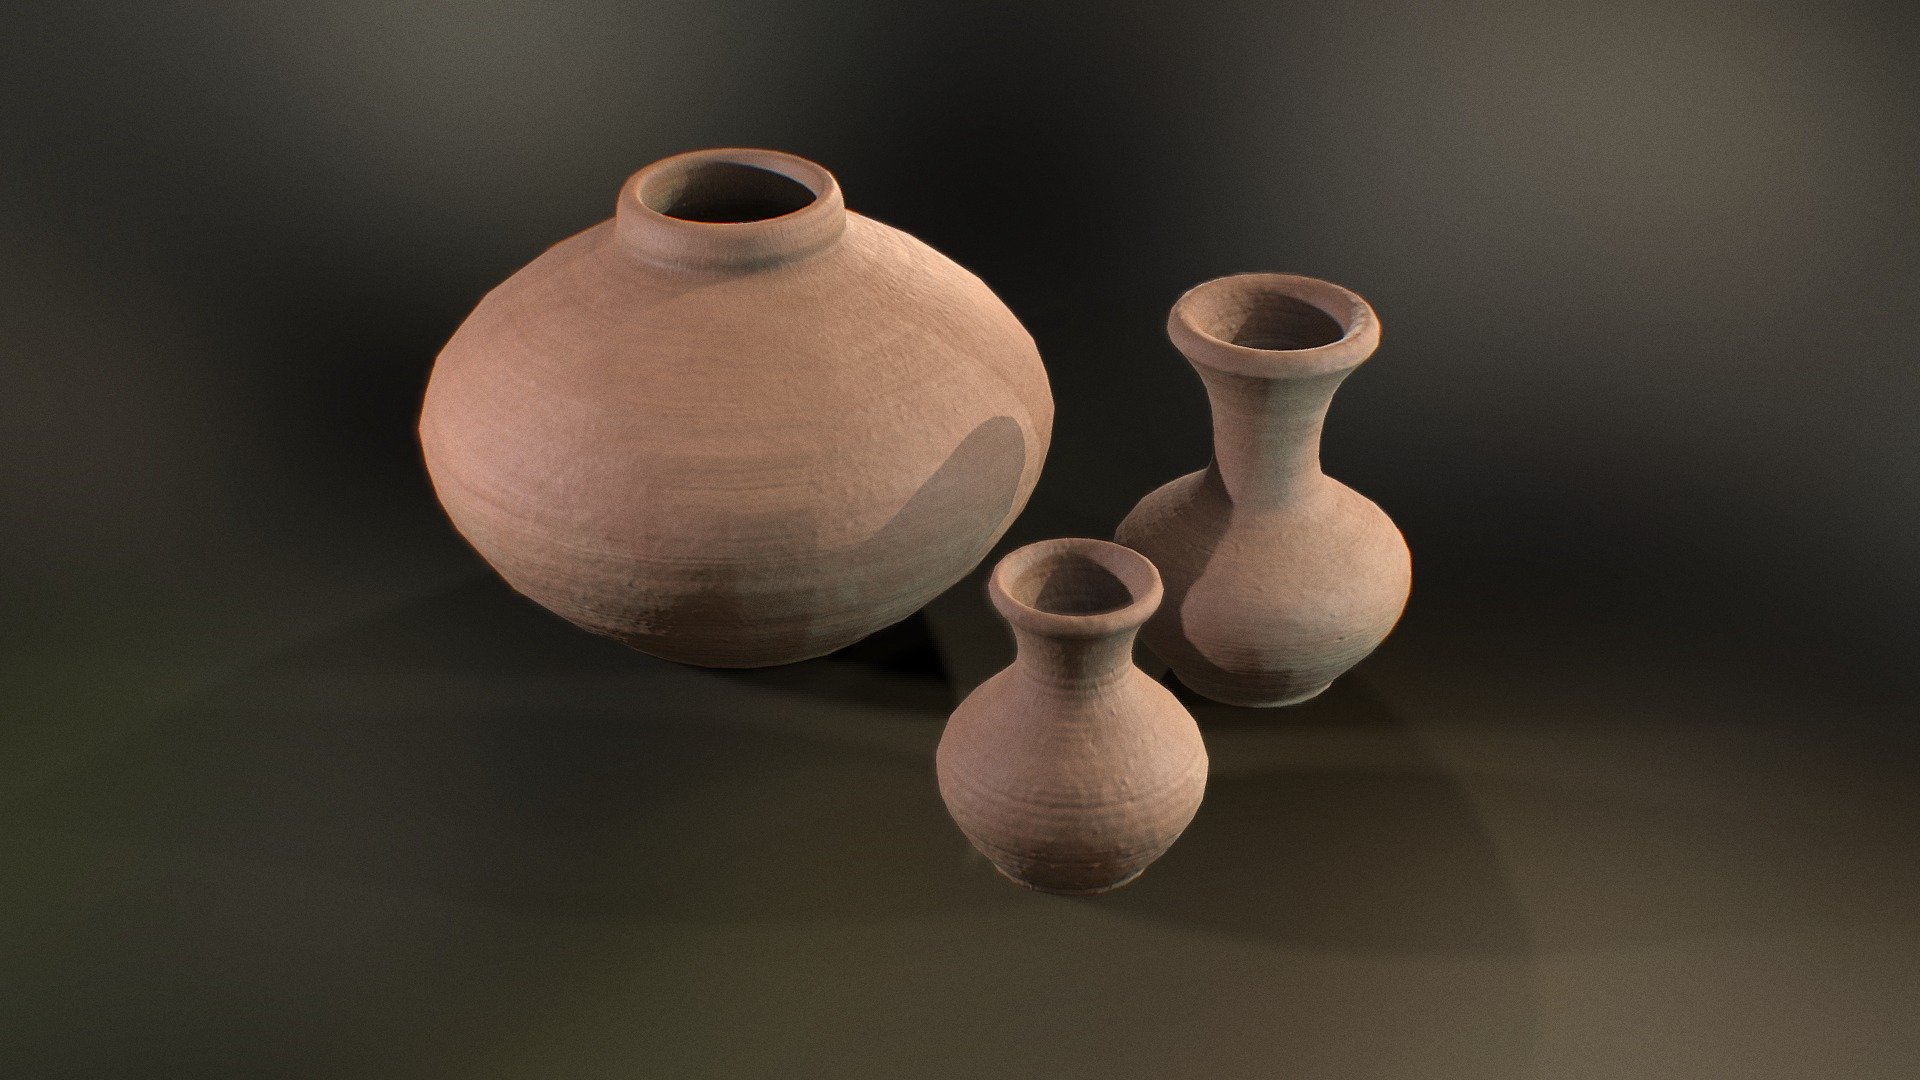 This is a 3d model of clay Pots for using as water vessel. It is can be used as kitchenware assets for games and other store markets renders.

This model is created in 3ds Max and textured in Substance Painter.

This model is made in real proportions.

High quality of textures are available to download.

Maps include - Base Color, Normal, AO and Roughness Textures 3d model